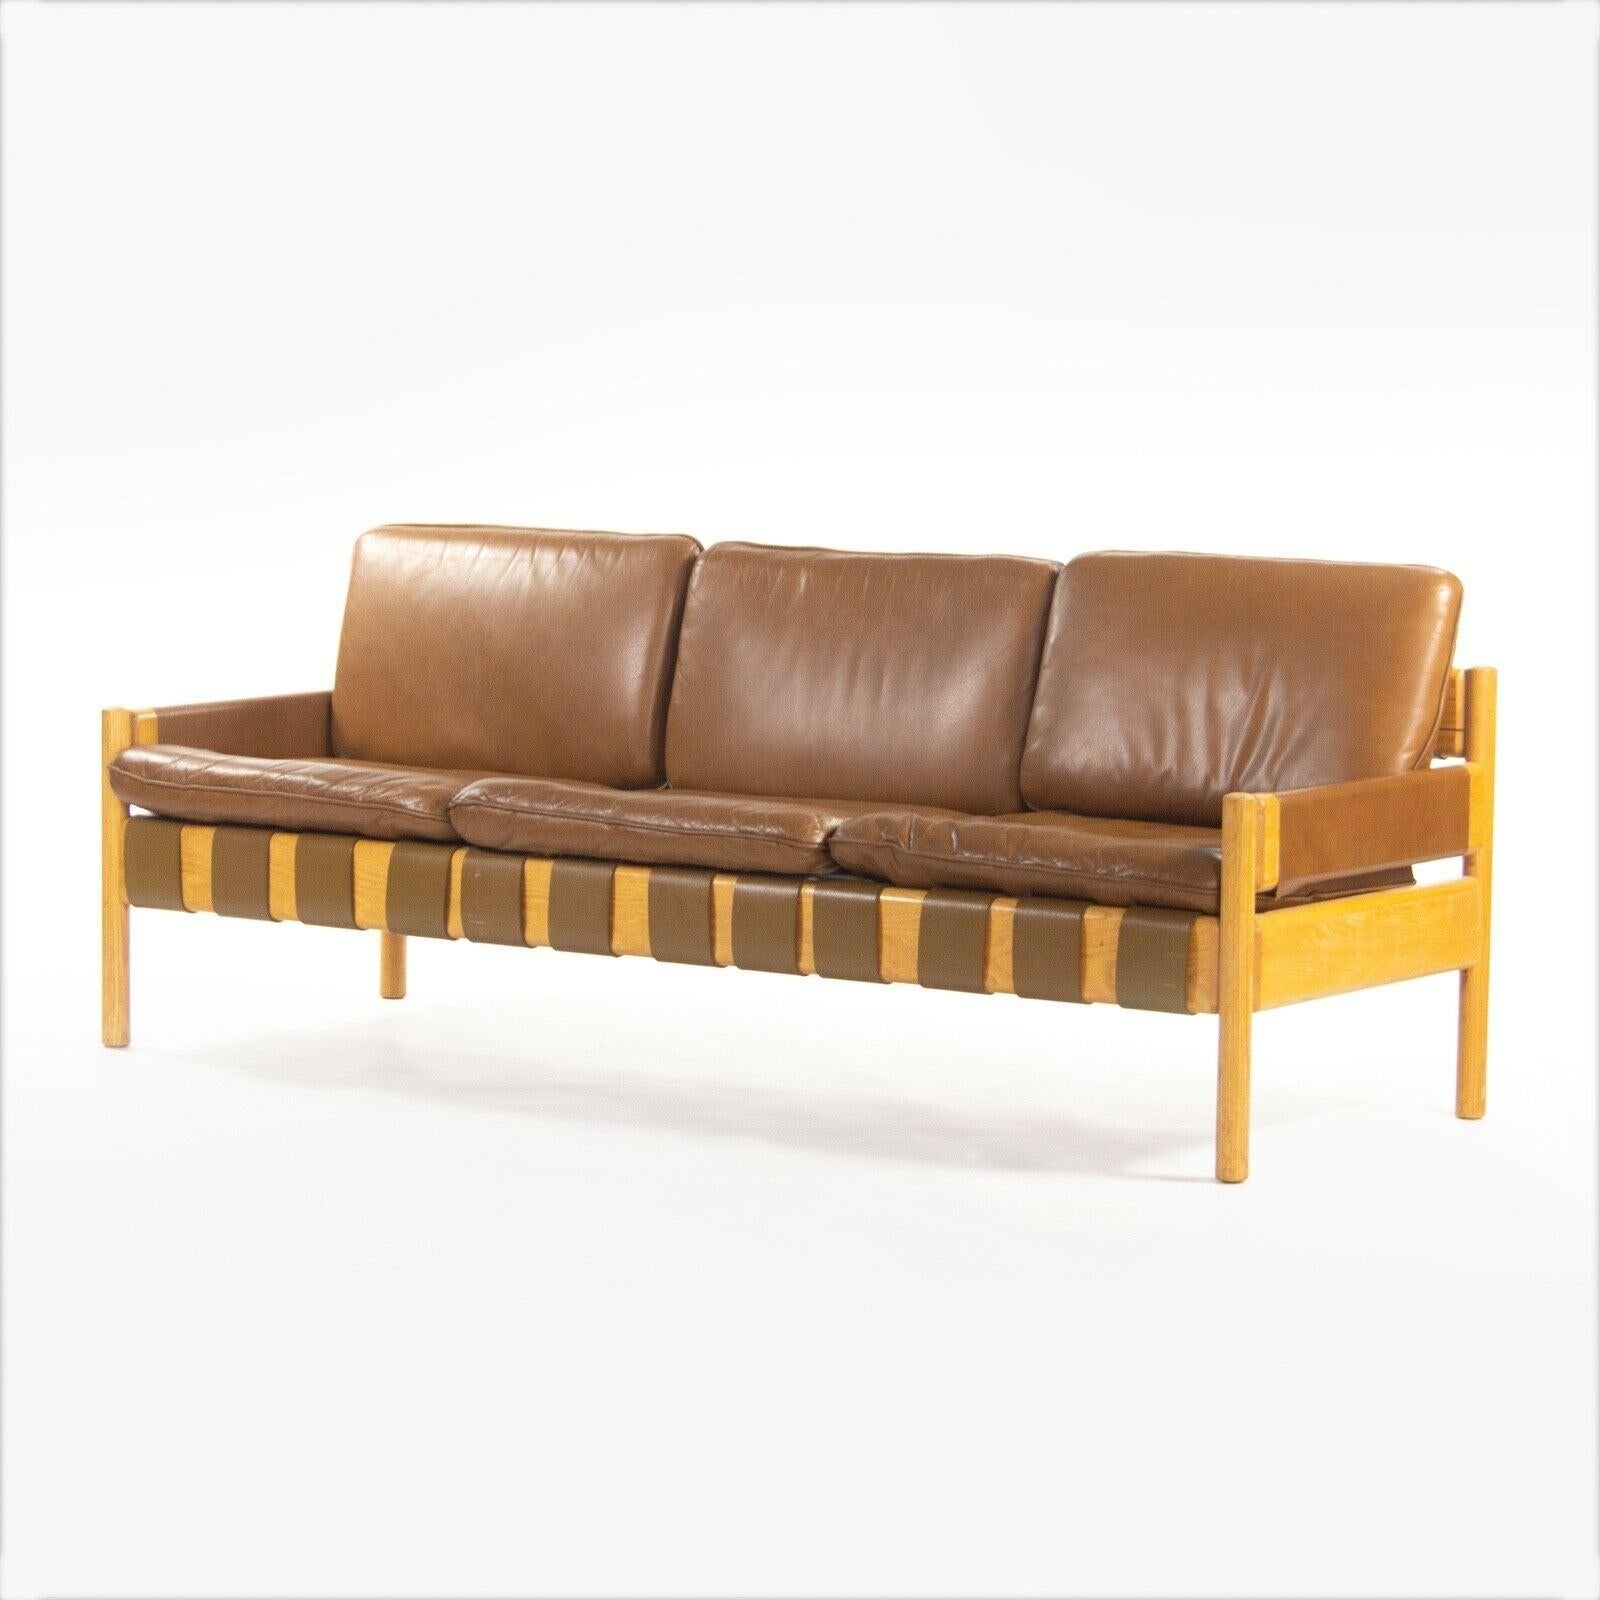 Listed for sale is a leather and oak Nicos Zographos Saronis sofa from 1976, which came directly from a Hugh Stubbins (Architect) designed library at a notable ivy-league institution. Additional provenance will be disclosed at time of sale. This